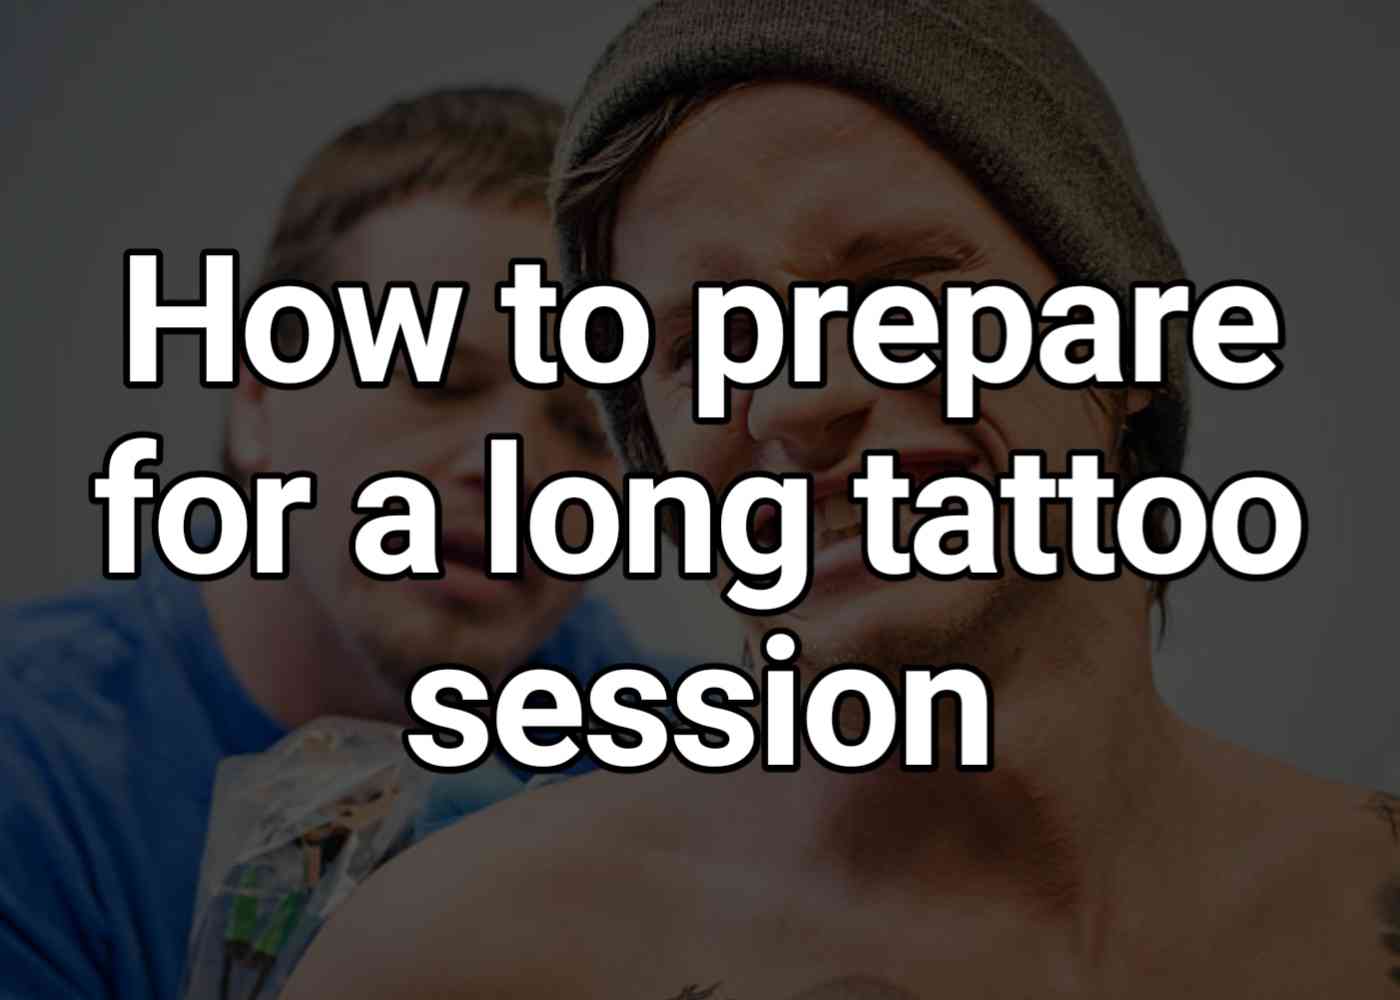 How to prepare for a long tattoo session